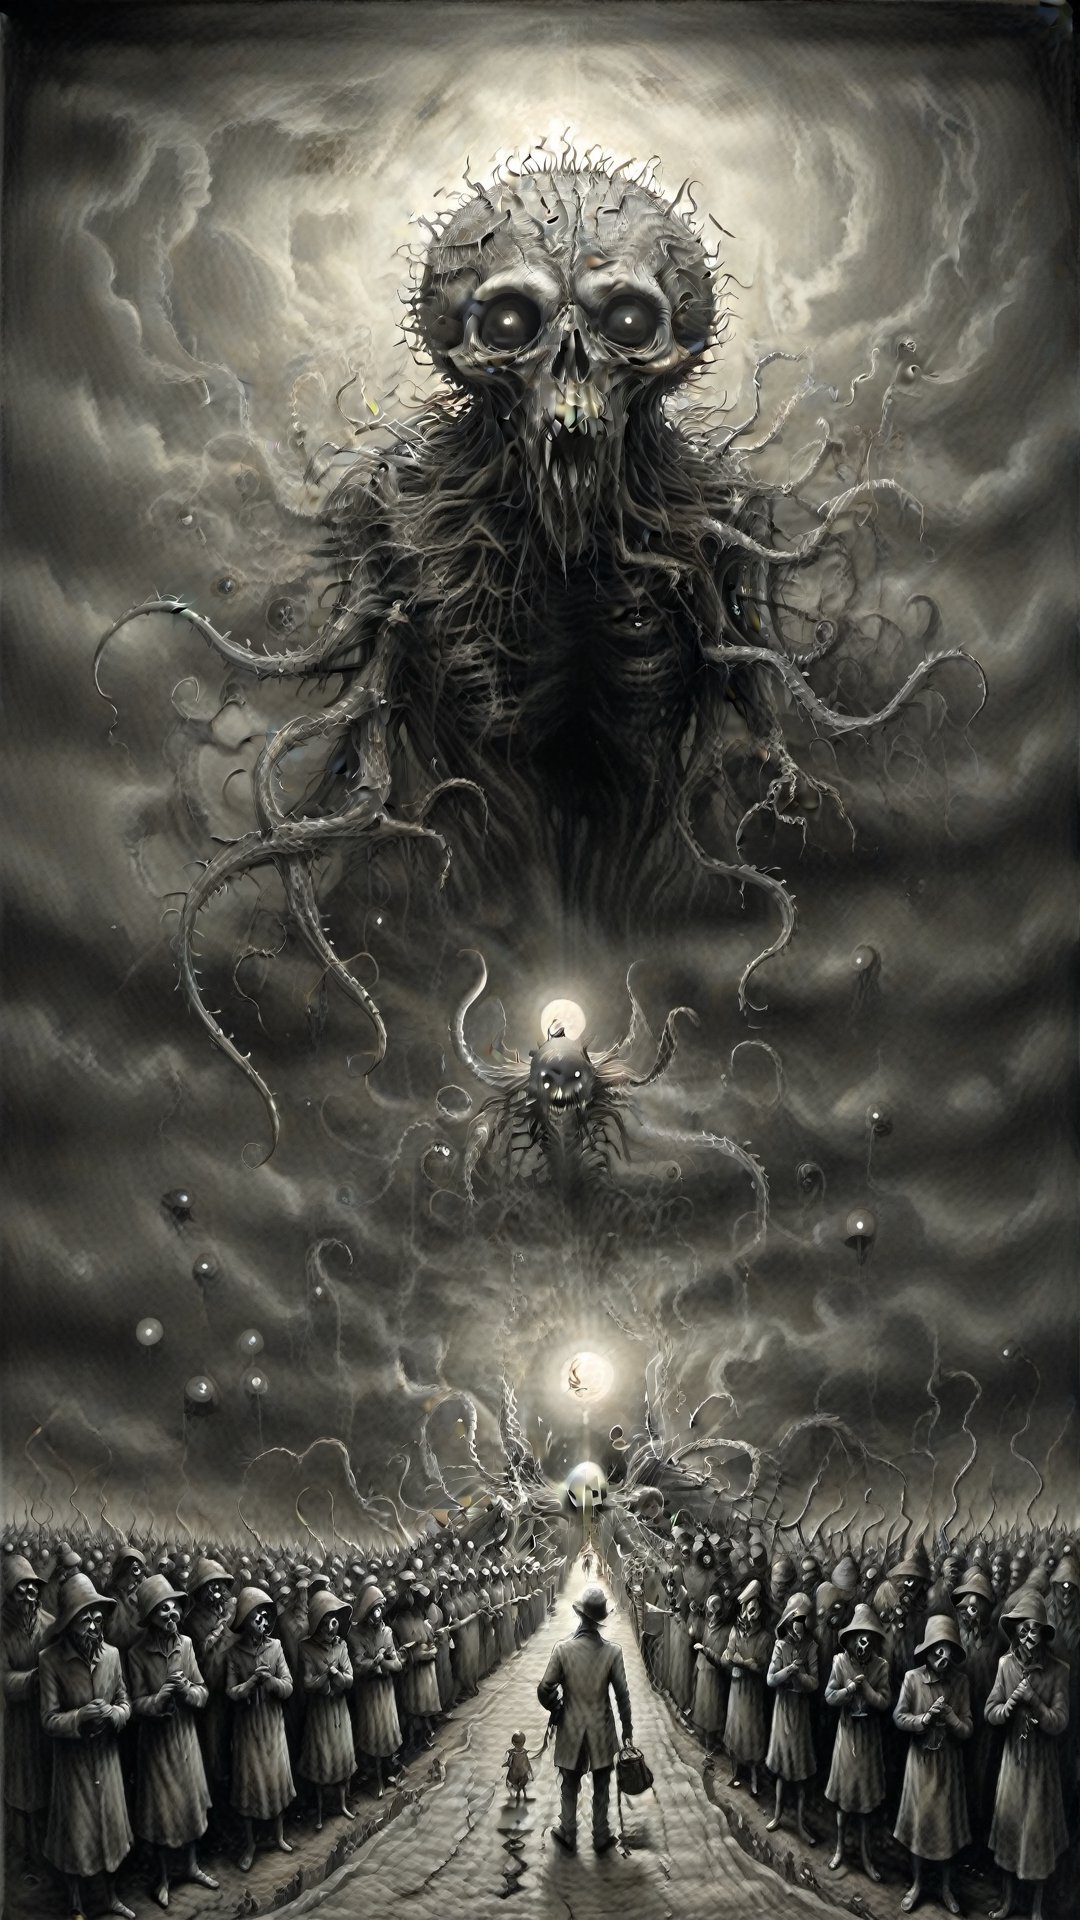 Painting made by John Kenn Mortensen, gift from hollow one, eldritch horror, landspace, masterpiece, megalophobia, acid trip, unsettling feel, pencil_drawing, photorealistic, John Kenn Mortensen,more detail XL,art by sargent,cinematic  moviemaker style